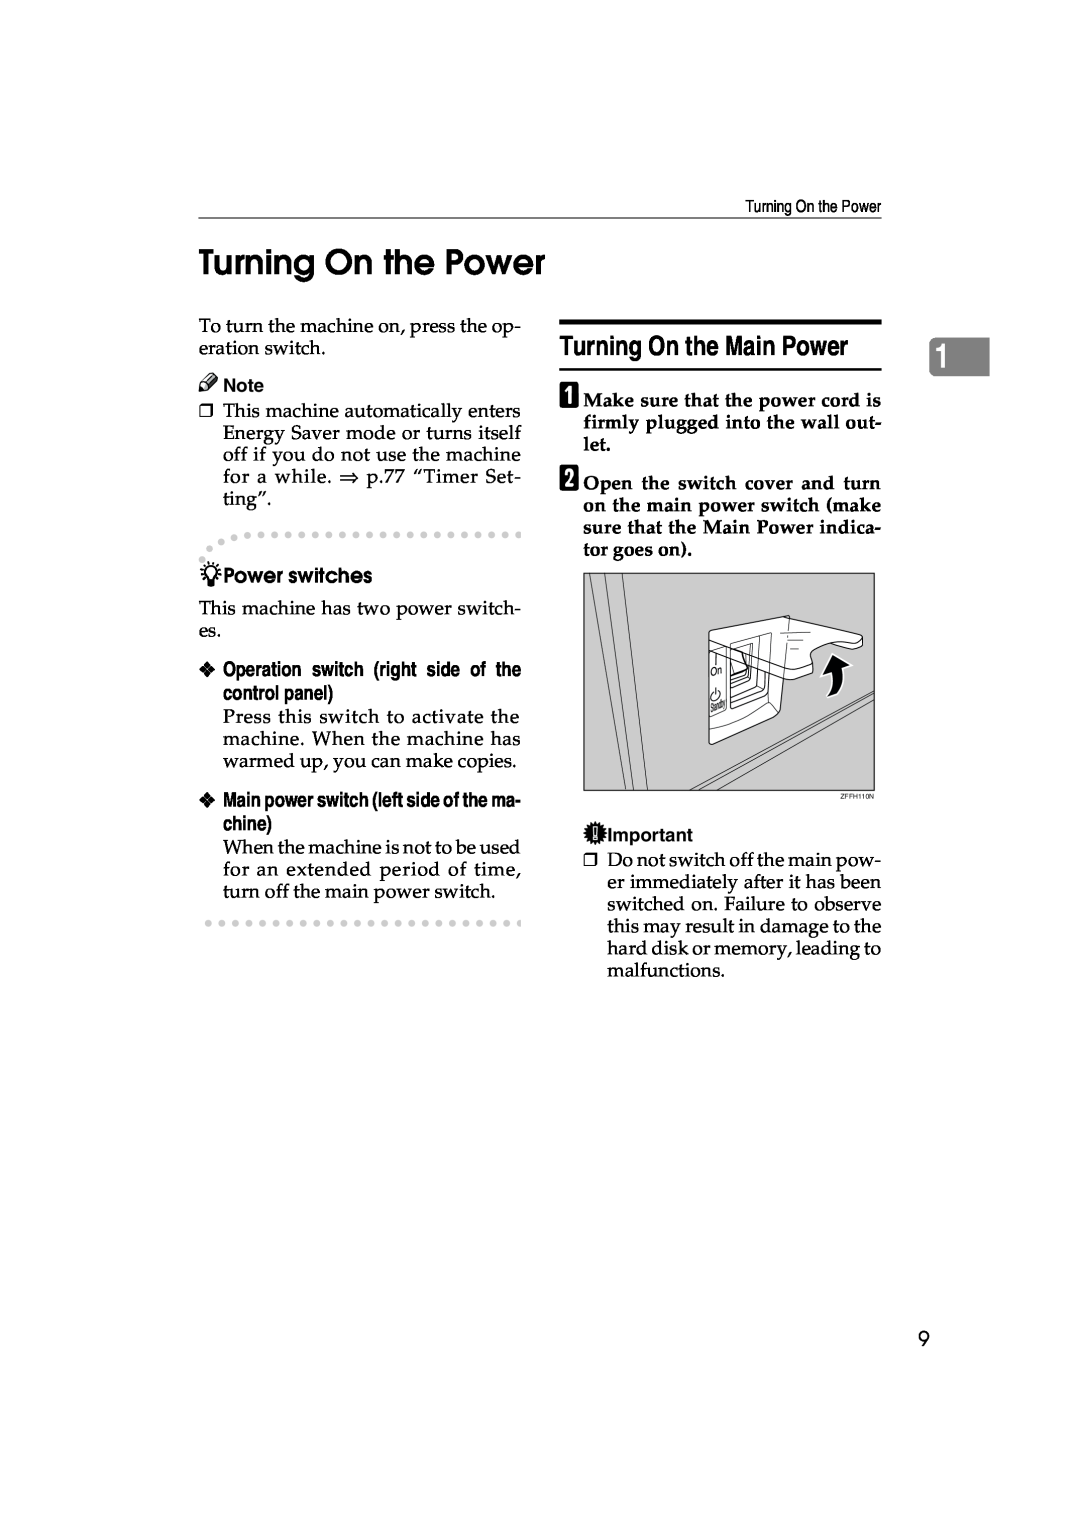 Lanier 5622 AG, 5627 AG manual Turning On the Power, Turning On the Main Power, Power switches 